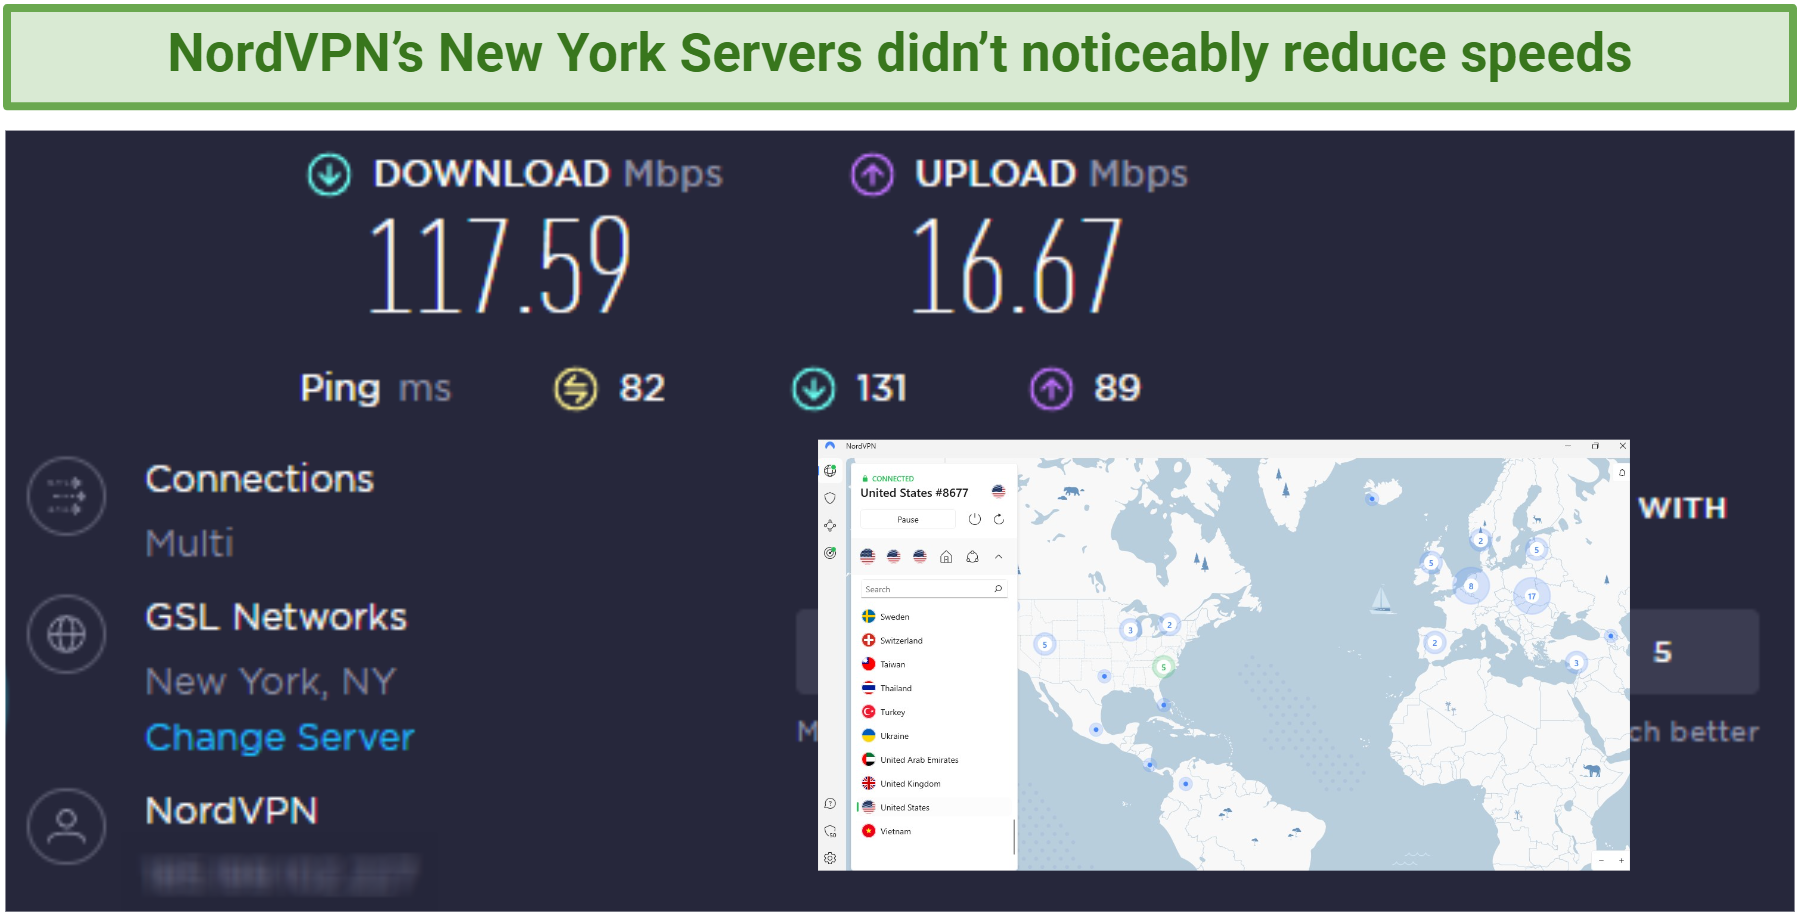 Screenshot of NordVPN's NYC servers not reducing connection speeds too much